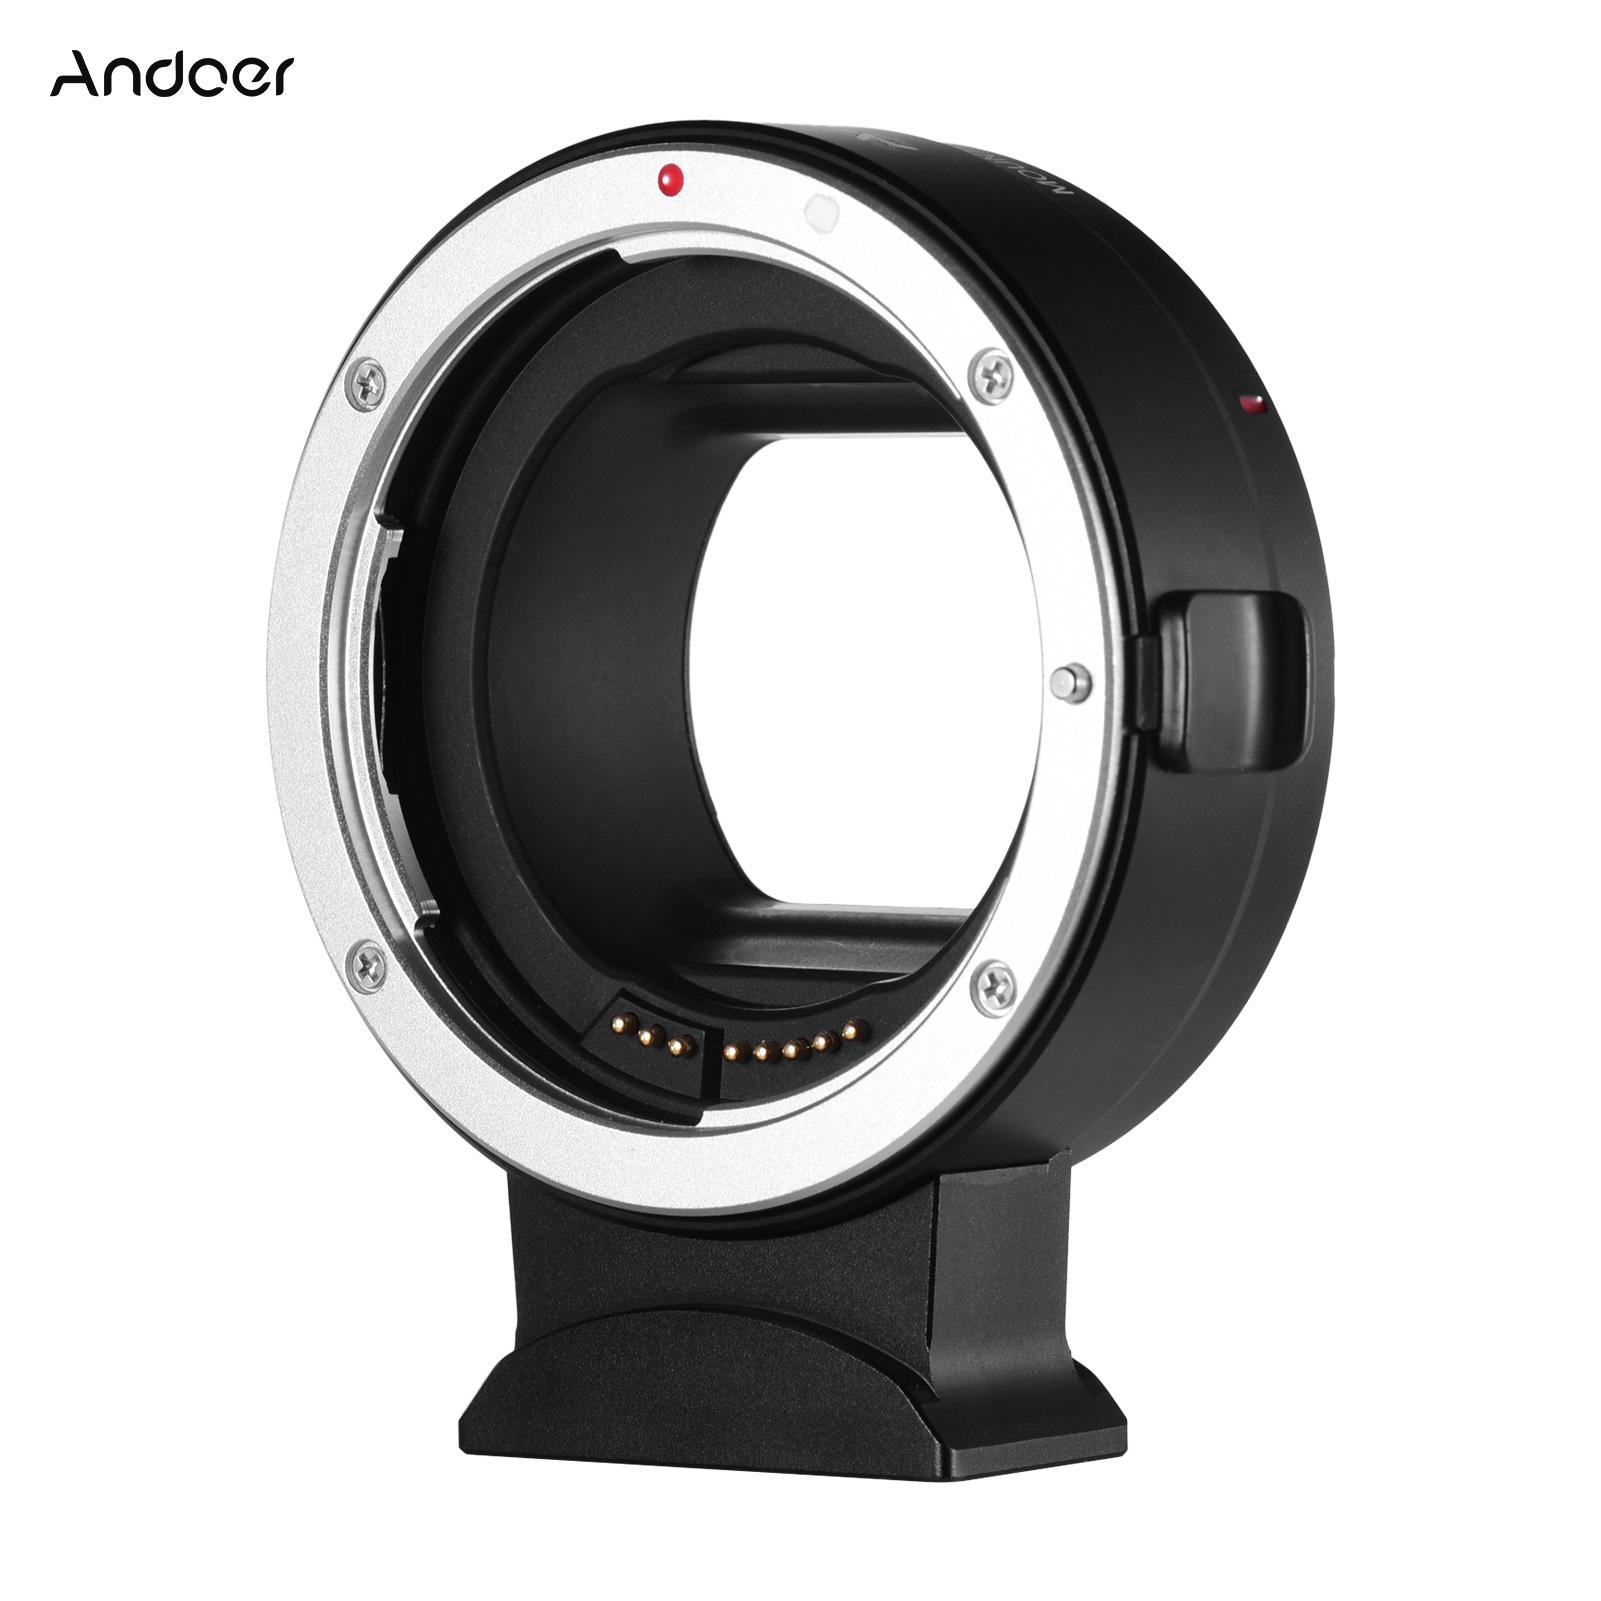 Andoer EF-EOSR Auto Focus Camera Lens Adapter Ring IS Image Stabilization Electronic Aperture